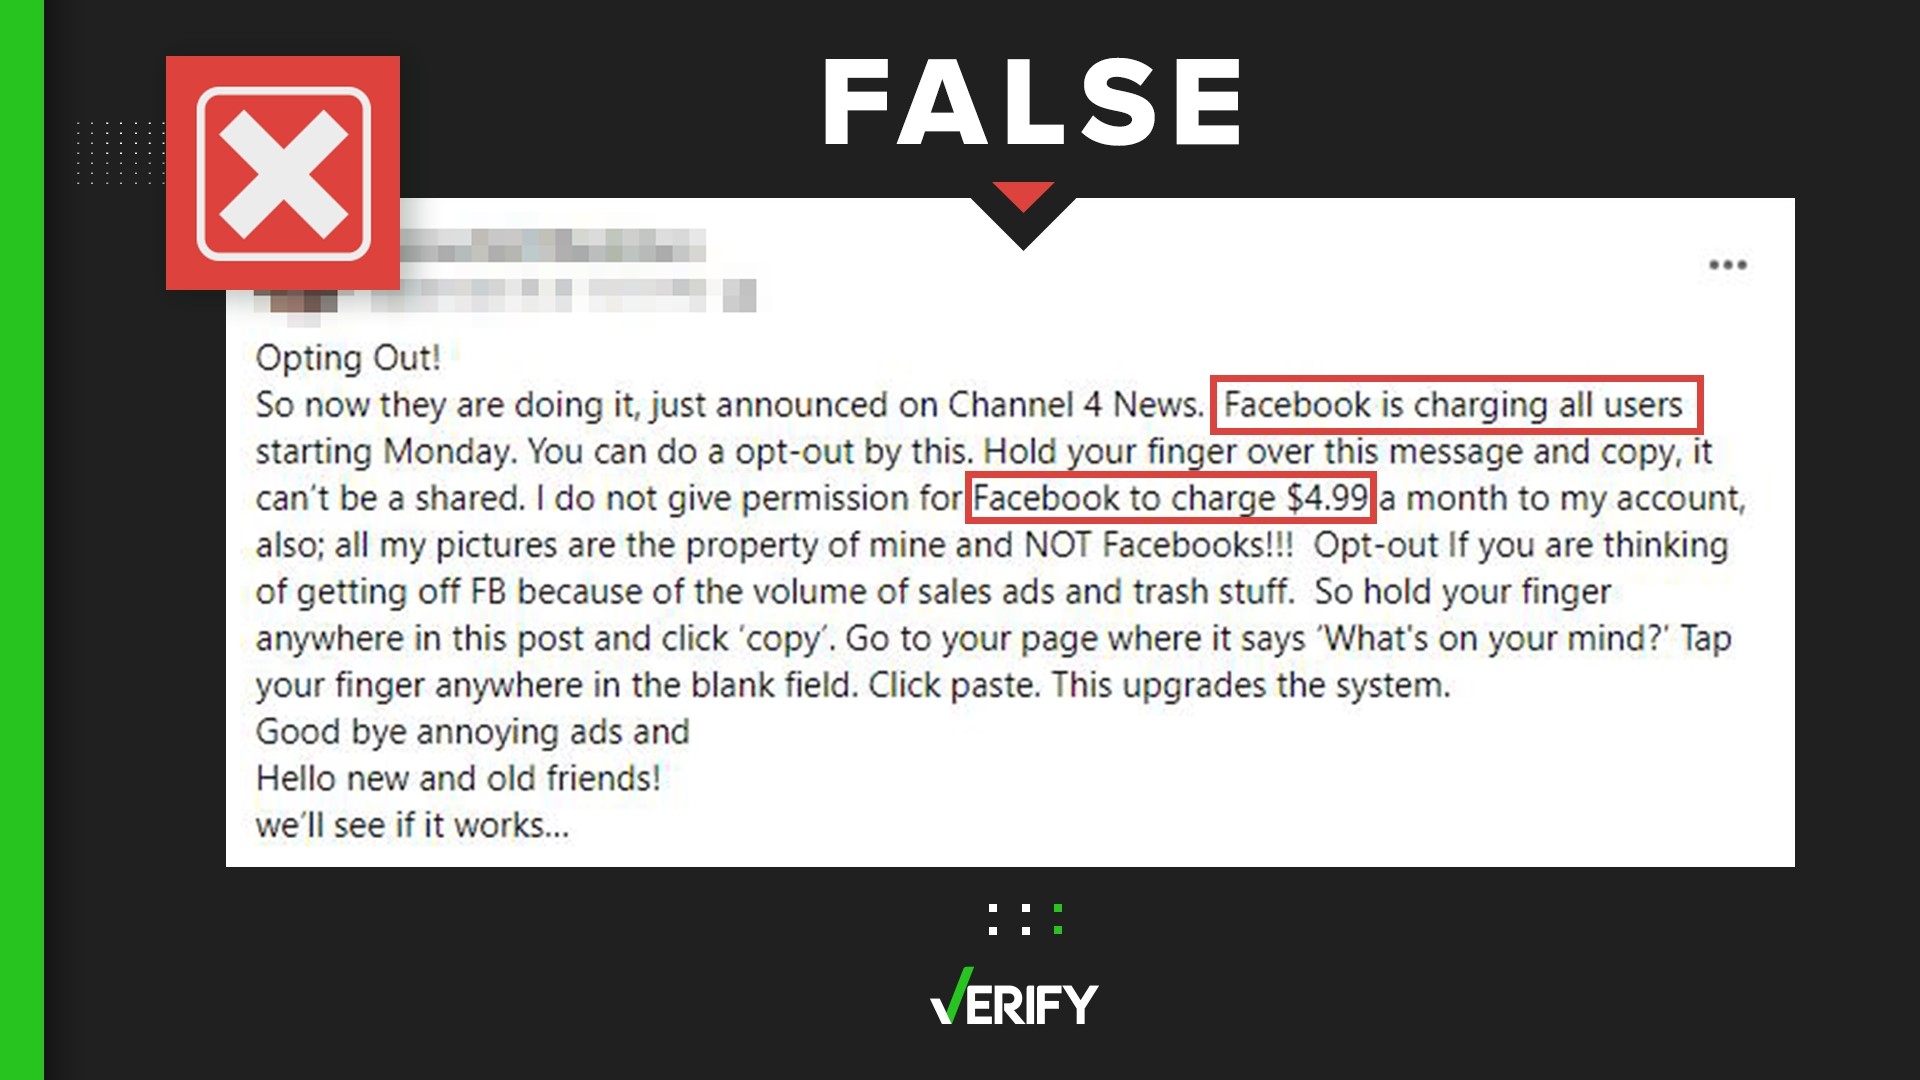 Viral chain messages that claim Facebook is going to start charging all users a fee to keep using the social media site are false.